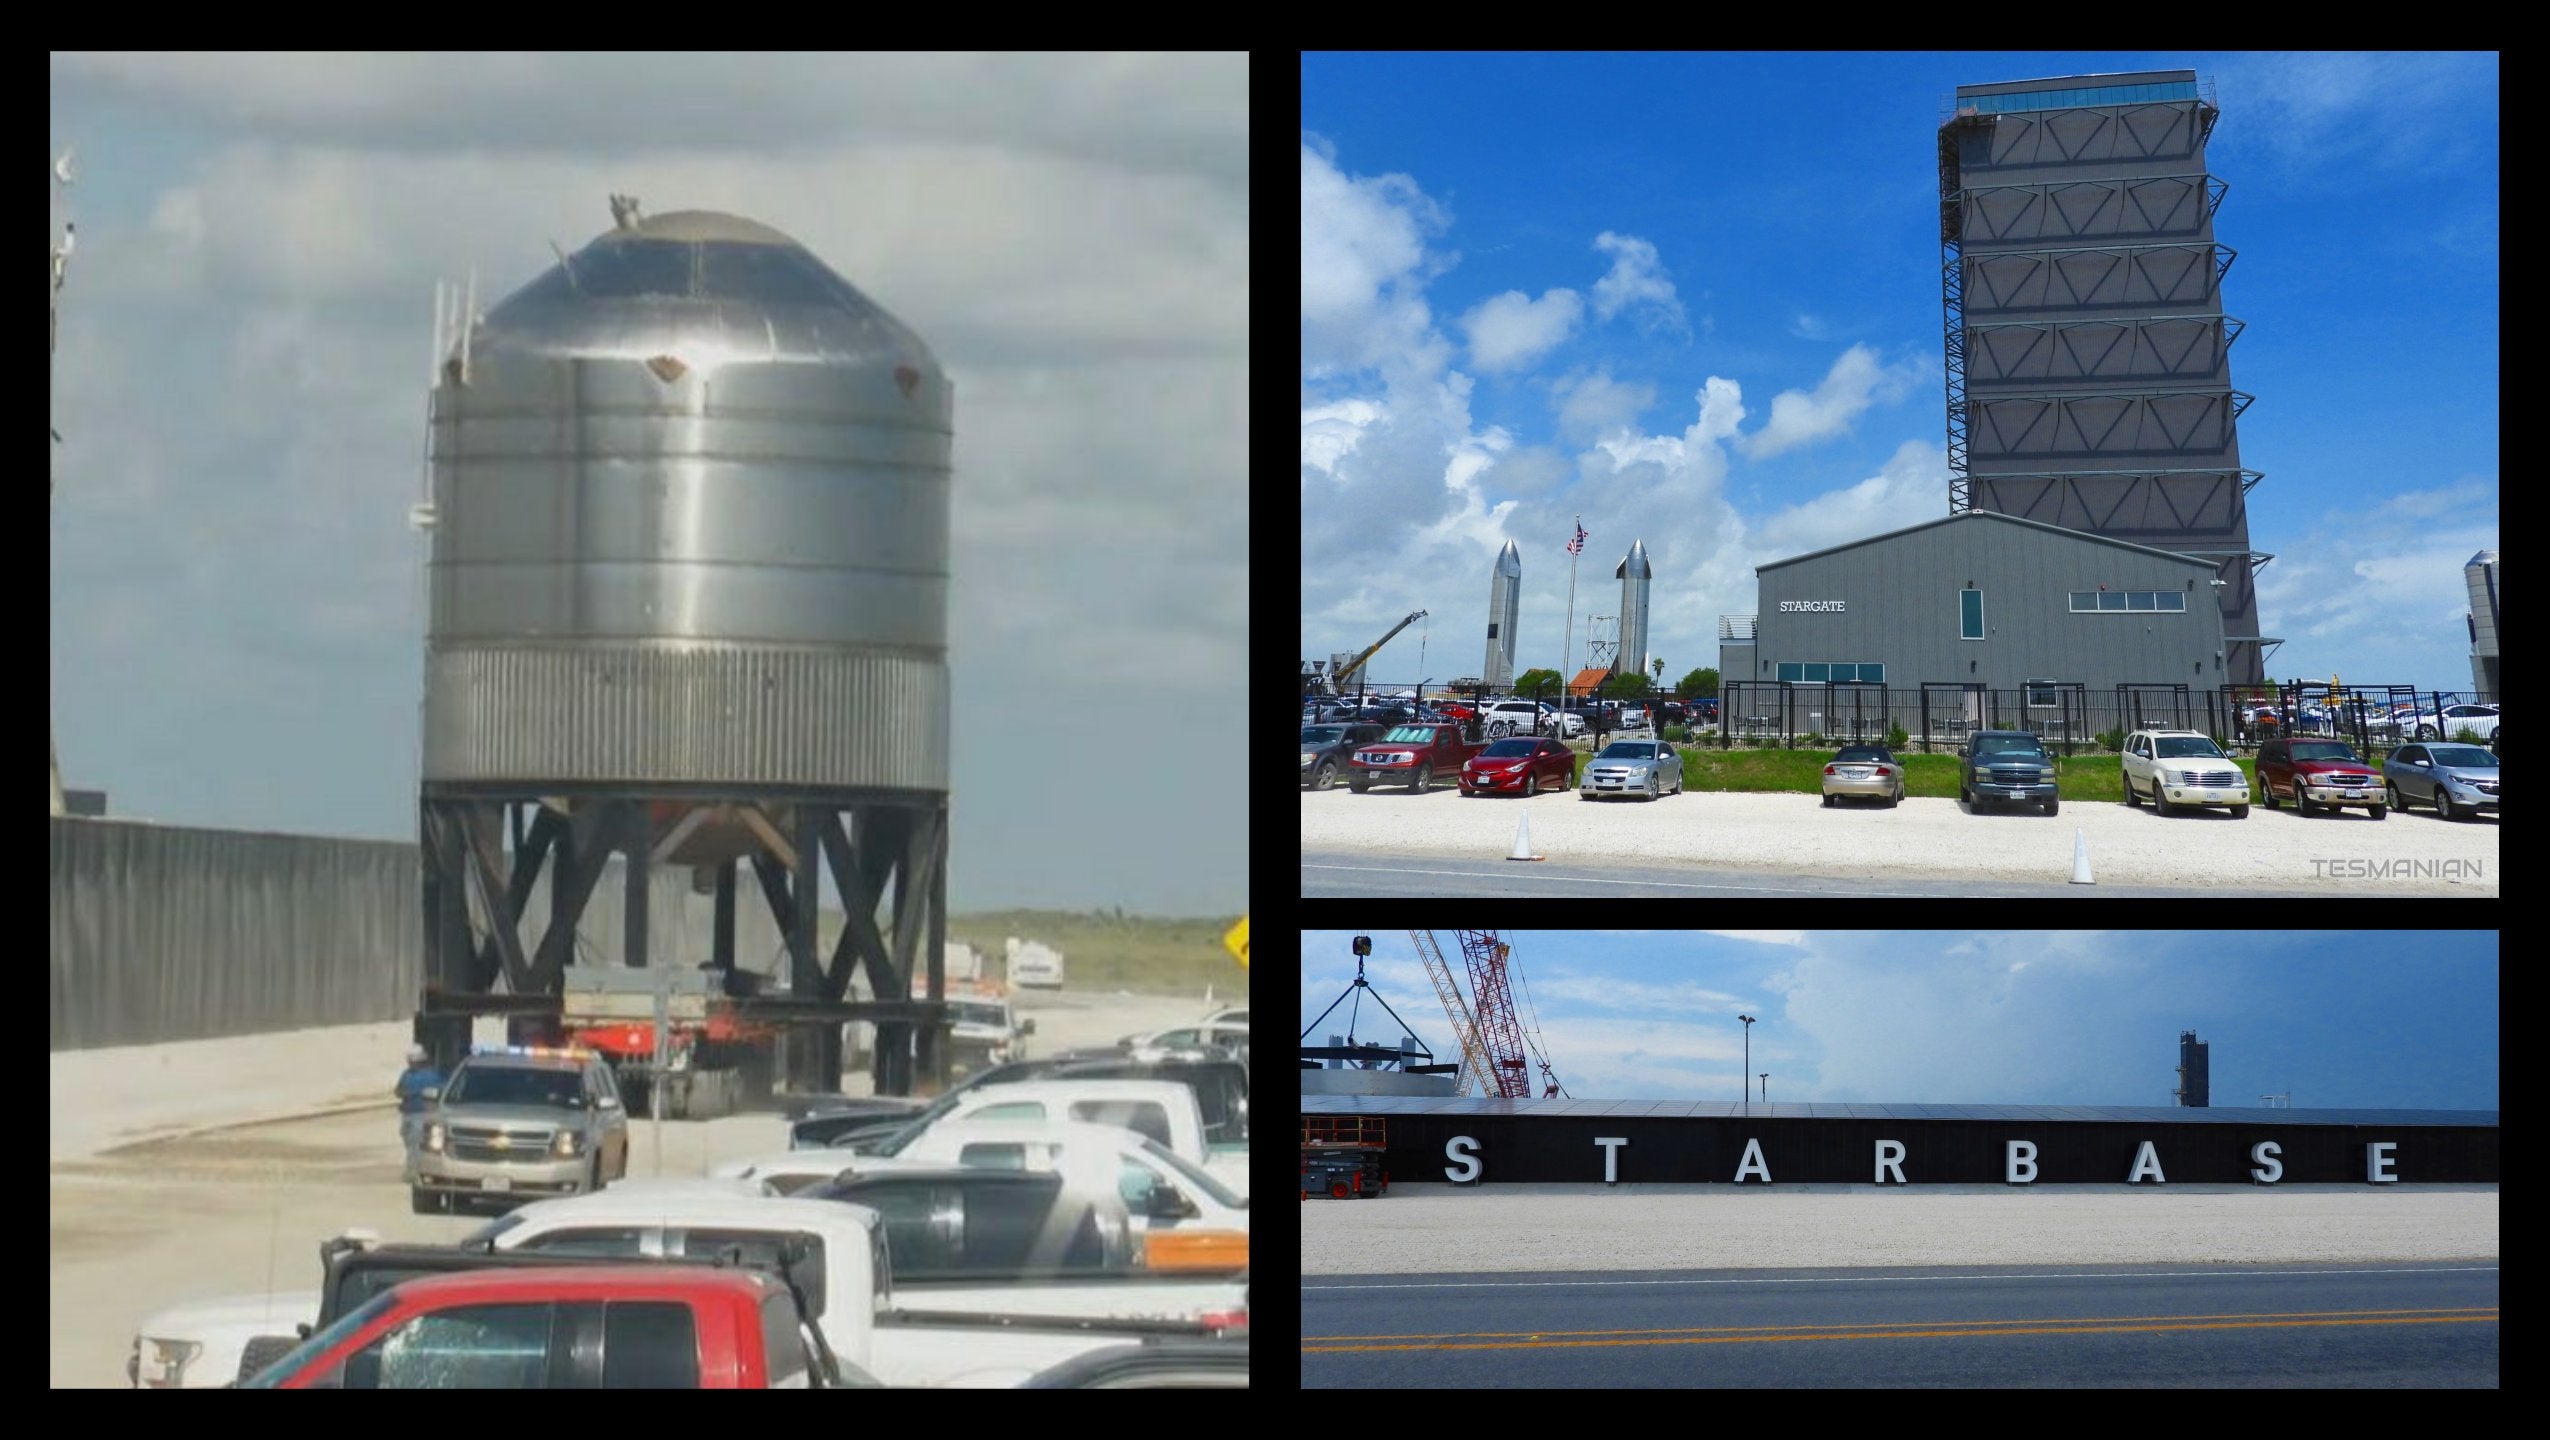 SpaceX Tests GSE Propellant Tank At Starbase Starship Launch Pad